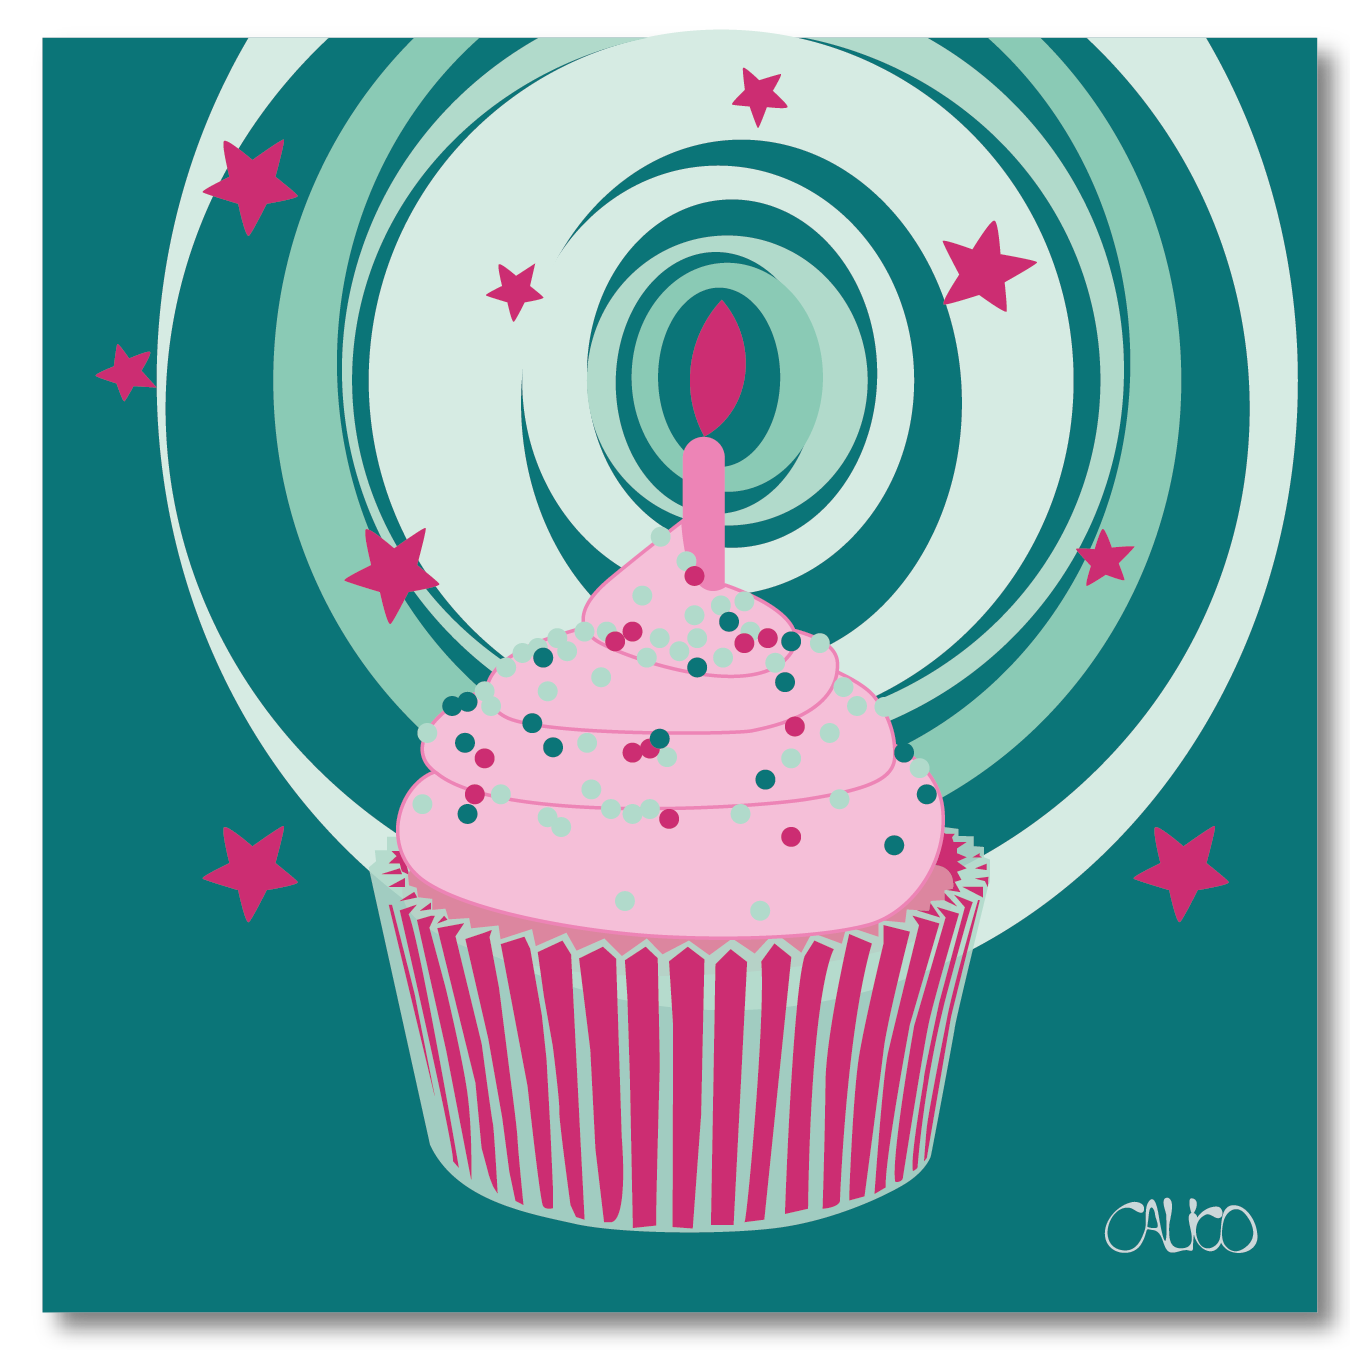 Have a Cupcake!